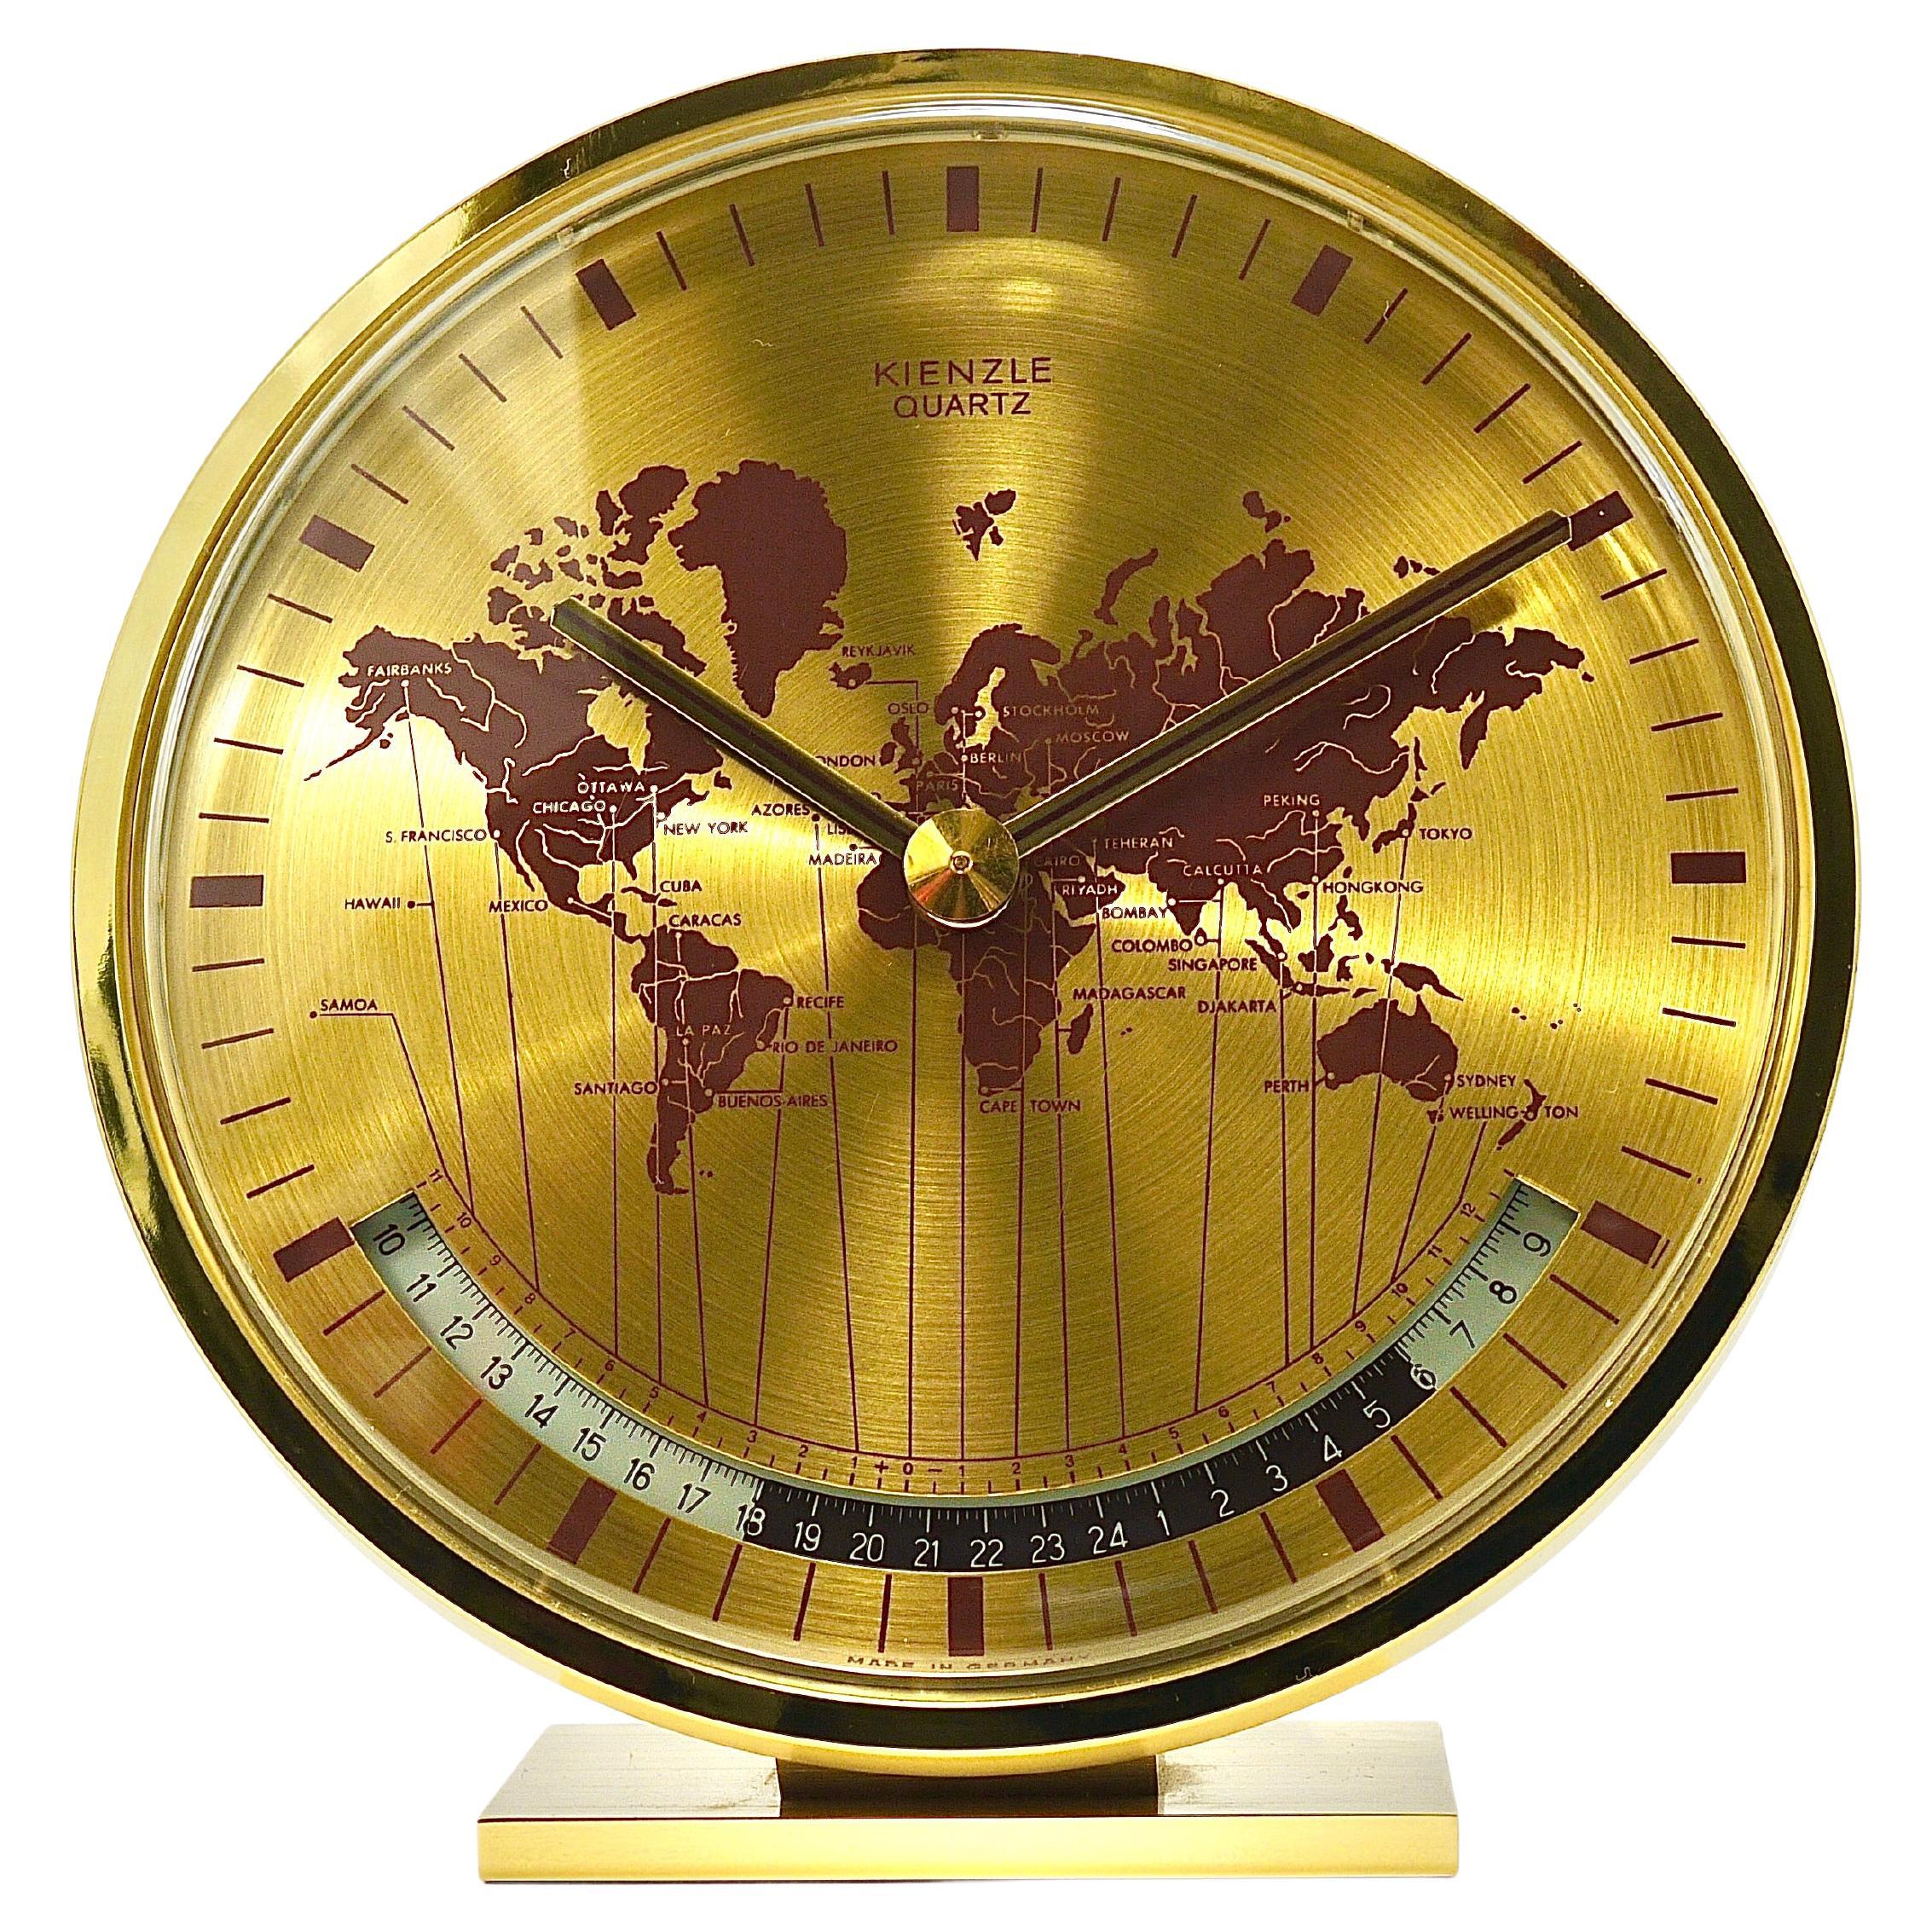 Kienzle GMT World Time Zone Brass Table Clock, Midcentury, Germany, 1960s For Sale